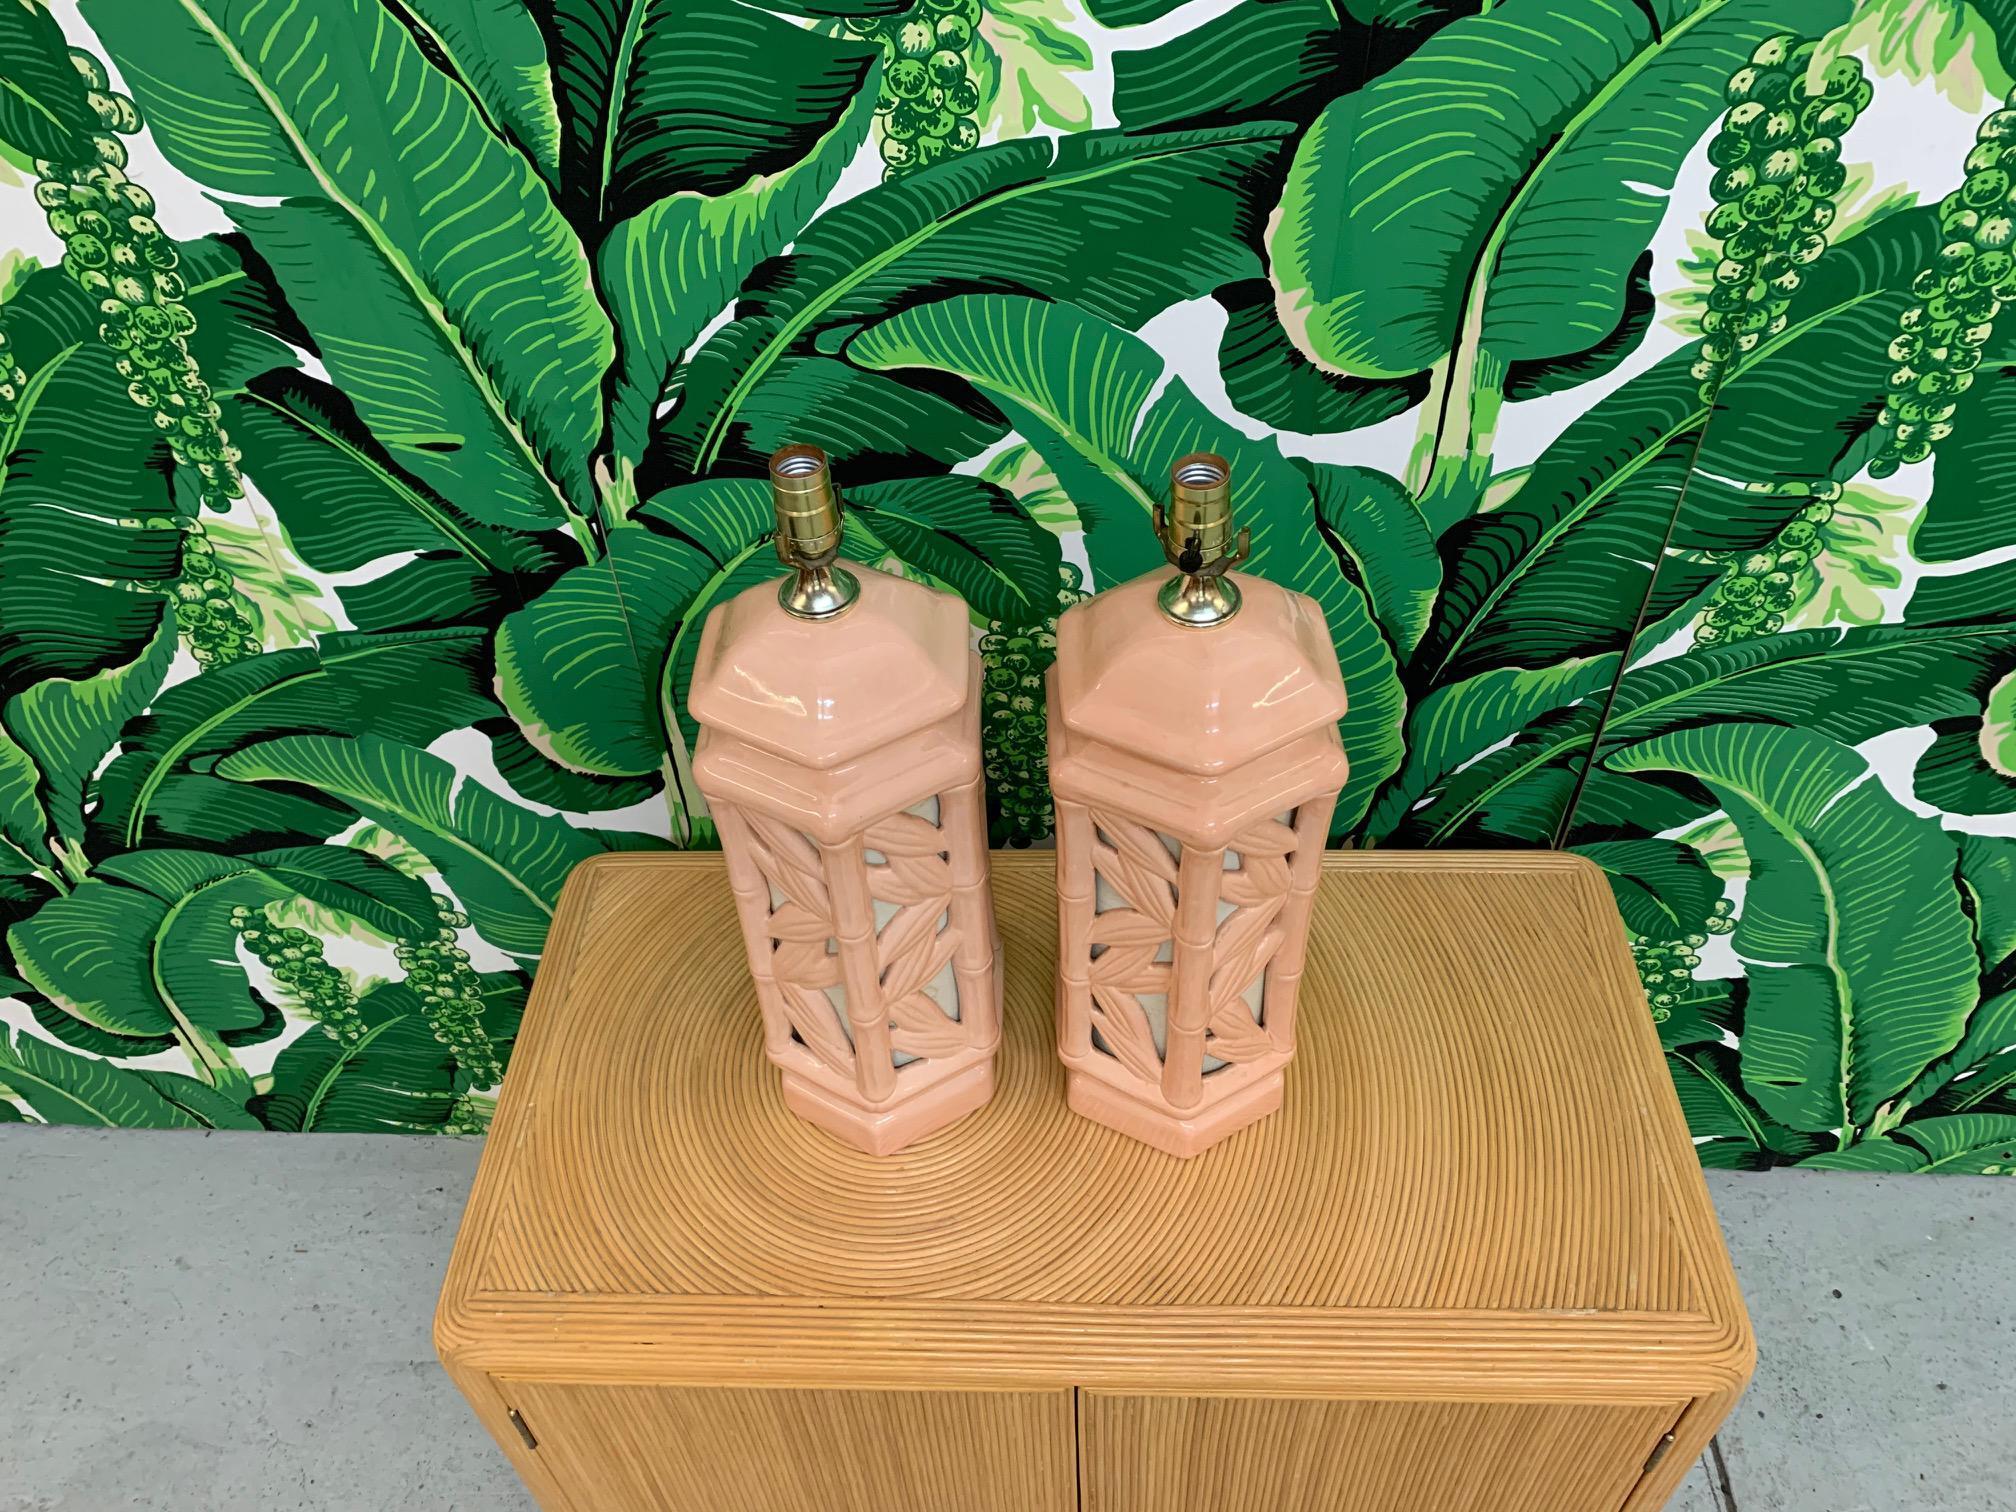 Pair of vintage ceramic table lamps feature faux bamboo detailing and lights within the body. Can be lit with either the main bulb, the body, or both. Very good condition with no cracks or chips. As with all vintage pieces, may exhibit scuffs or